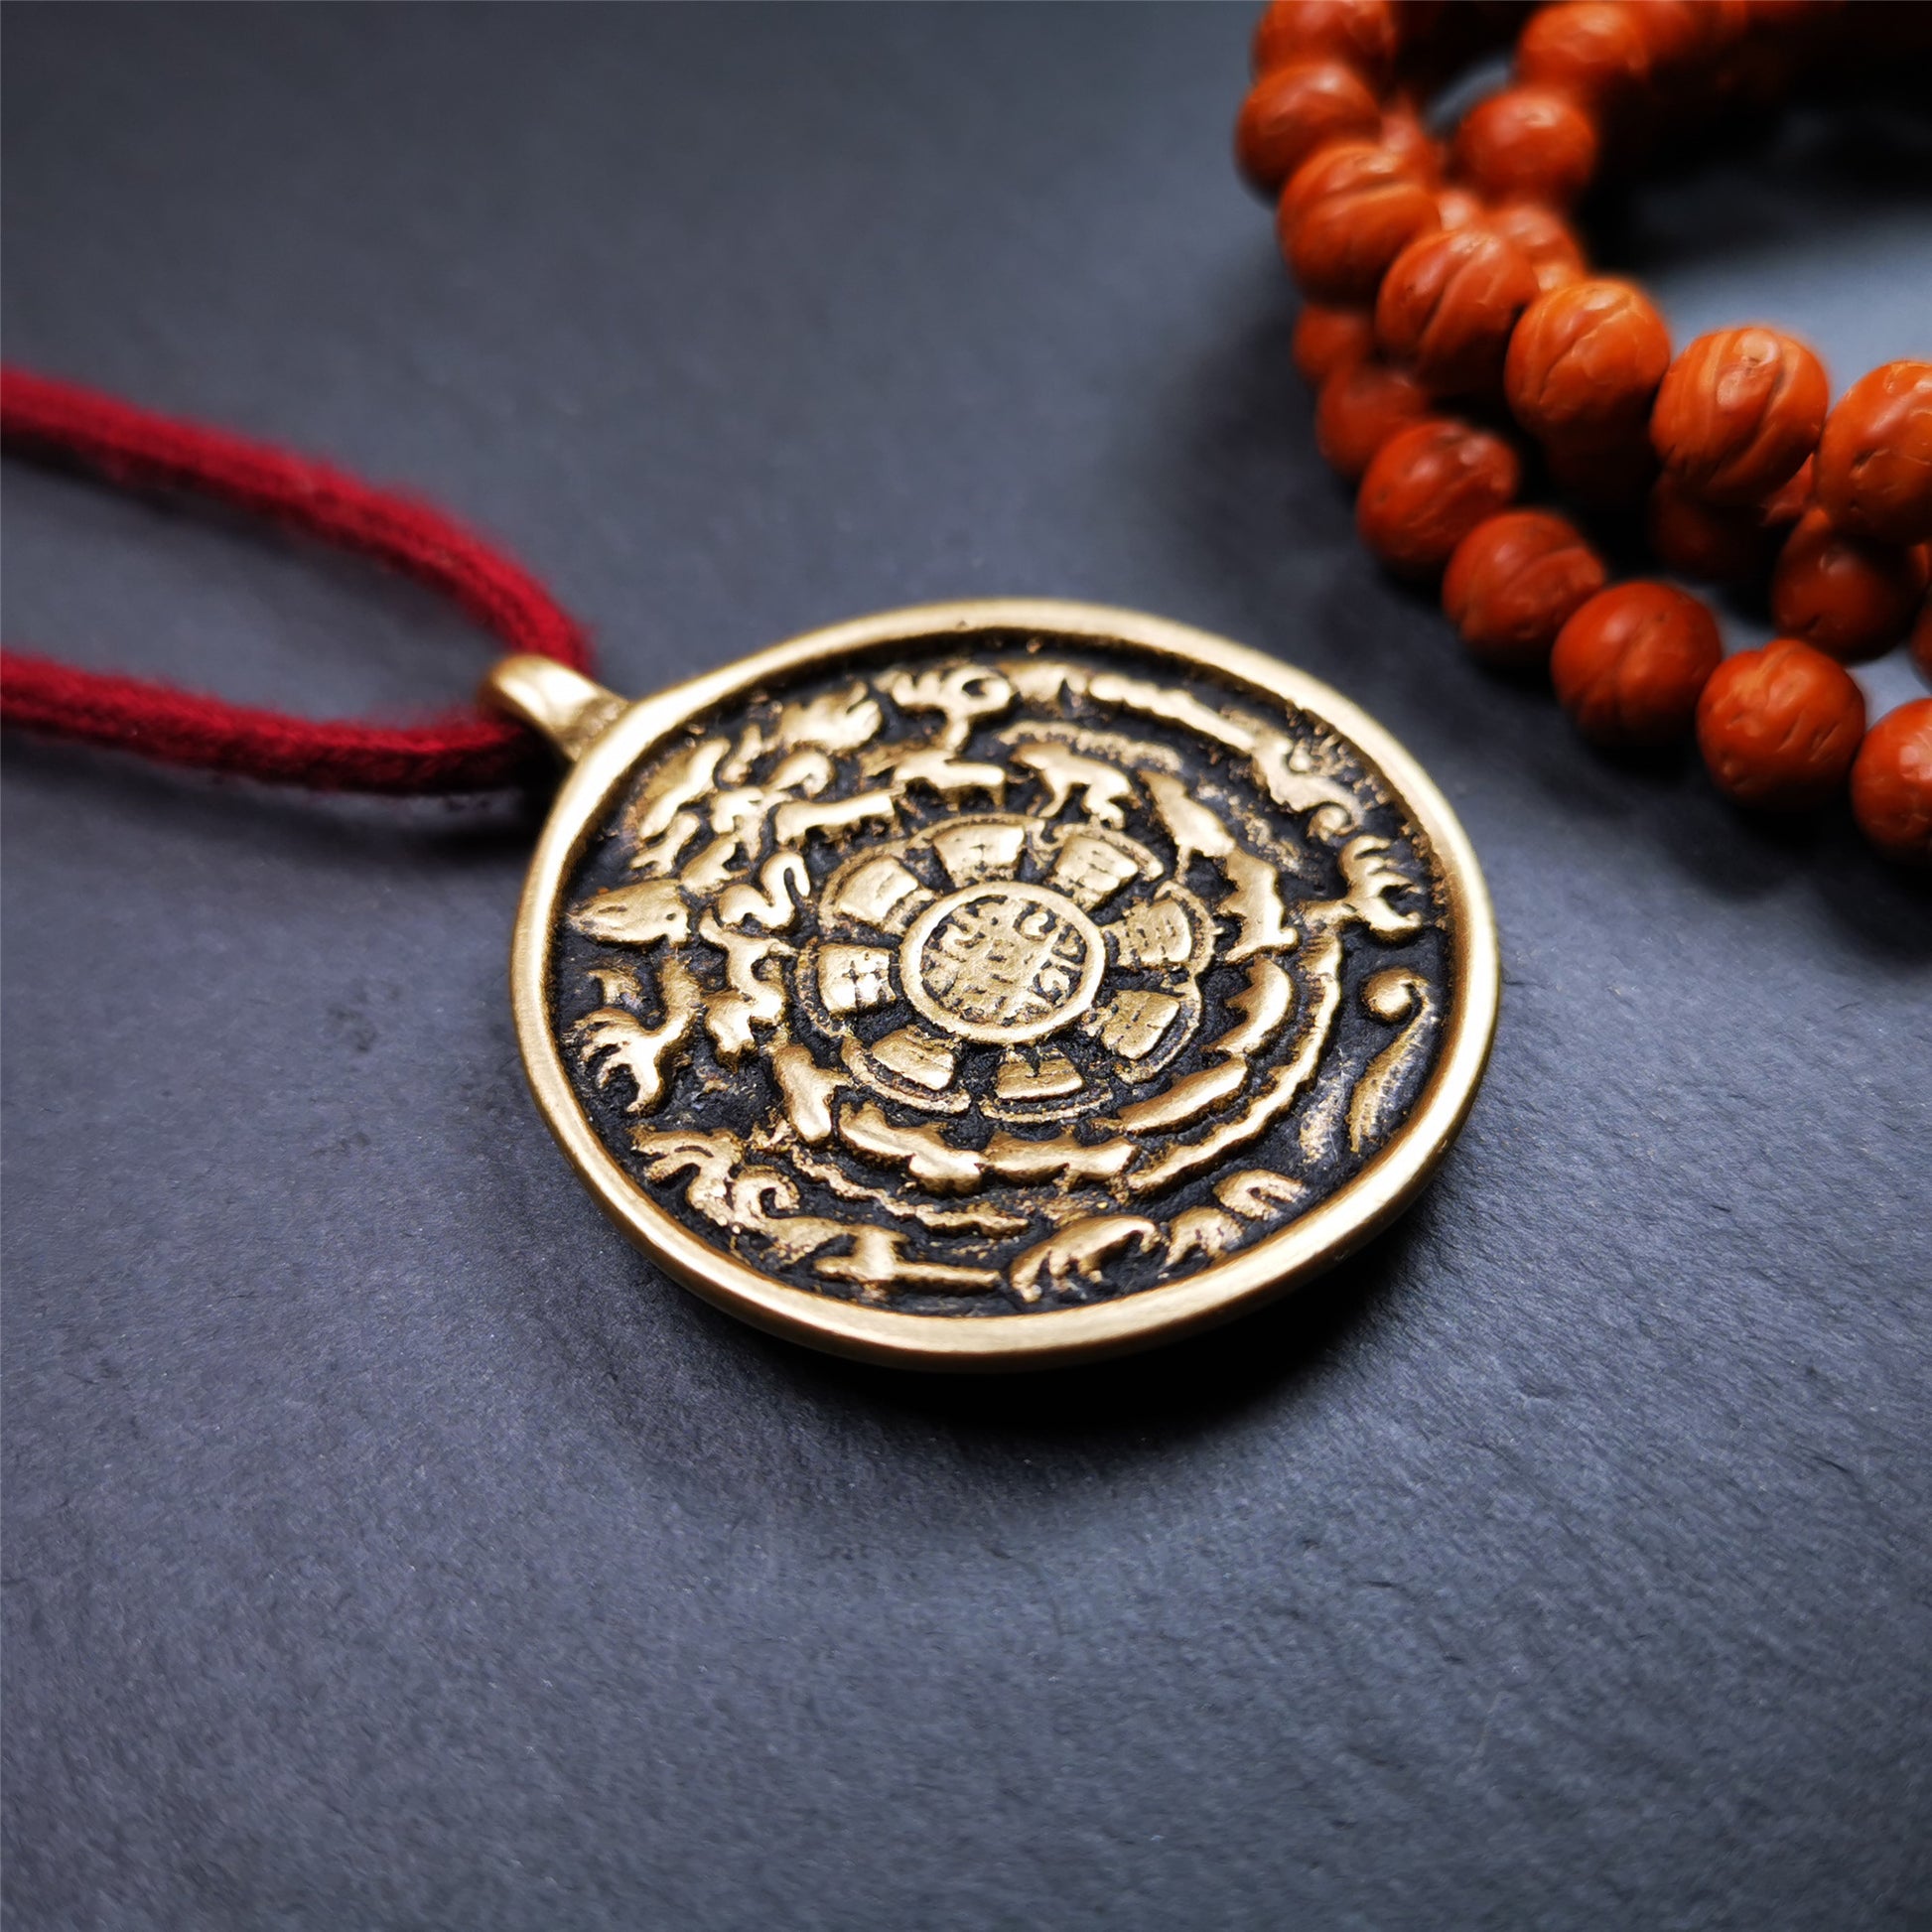 This unique Sipaho amulet was collected from Kathok Monastery,about 40 years old,bless by lama. It is round shape,made of copper,1.77 inch diameter.The front pattern is Tibetan Budhist calendar symbol - SIPAHO(srid pa ho),the back is a treasure vase.